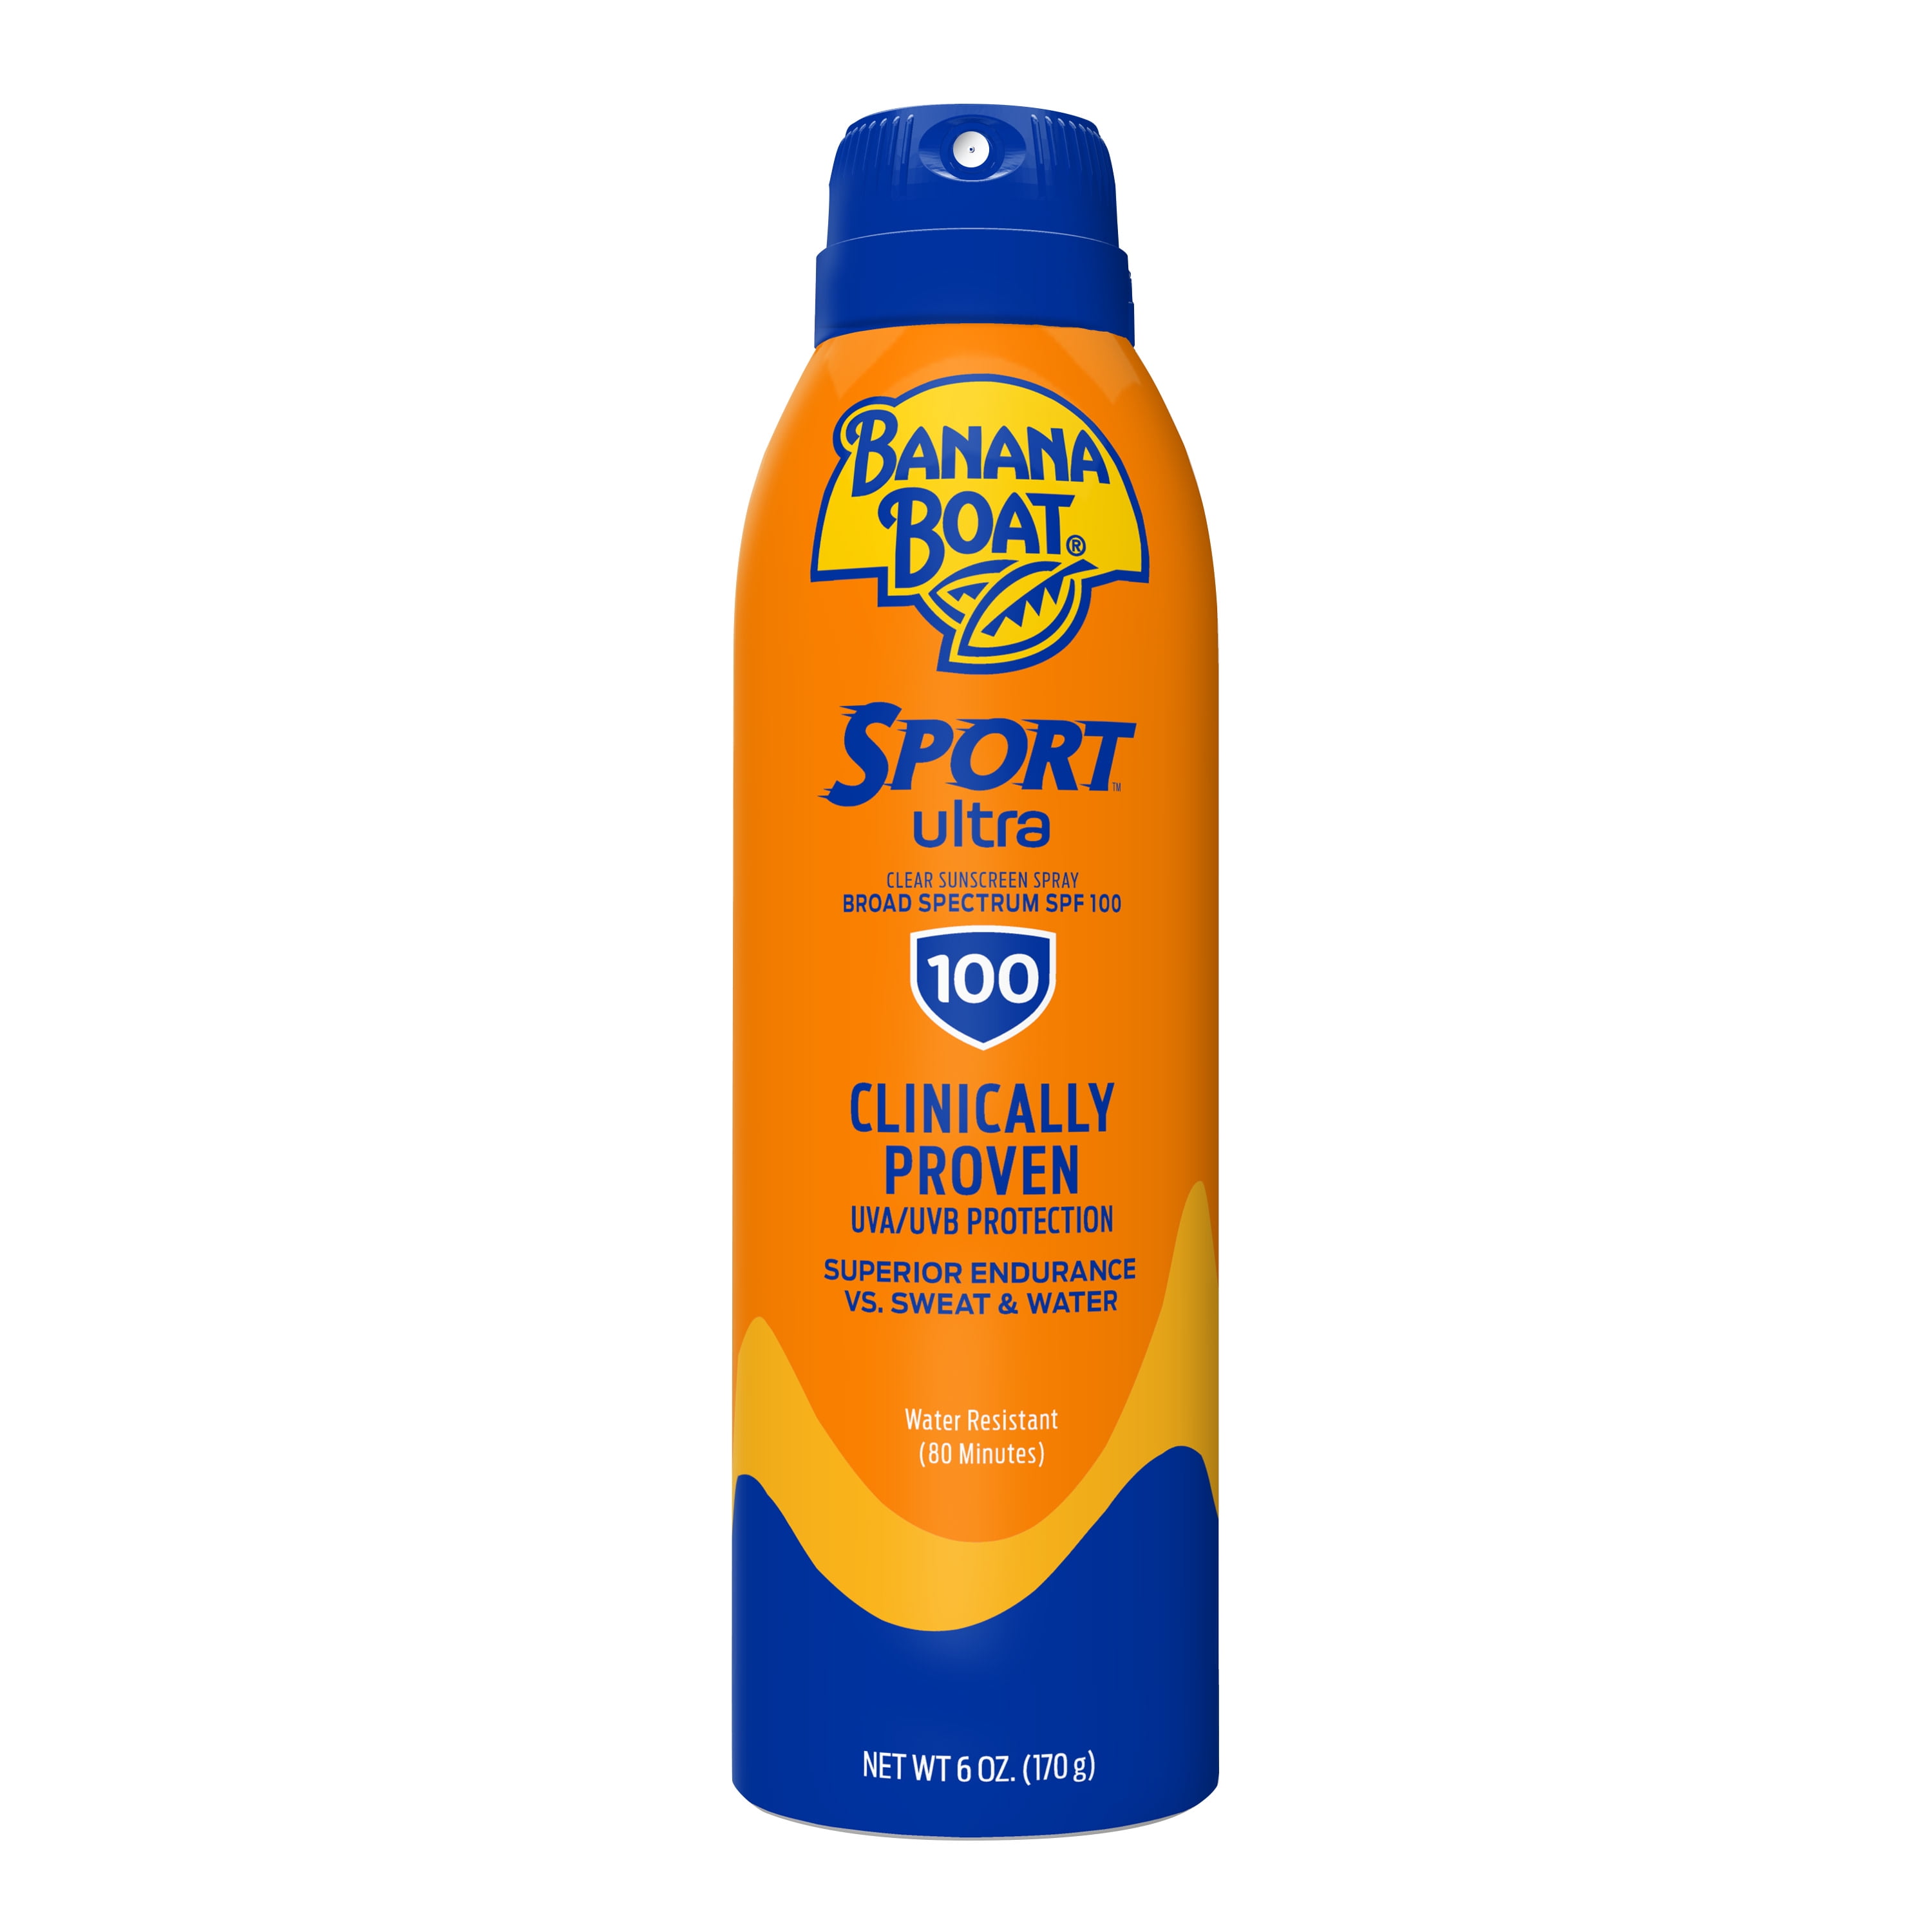 Banana Boat Sport Ultra Sunscreen Spray 6 Oz, 100 SPF, Water Resistant Sunblock (80 Minutes), Superior Endurance VS Sweat And Water